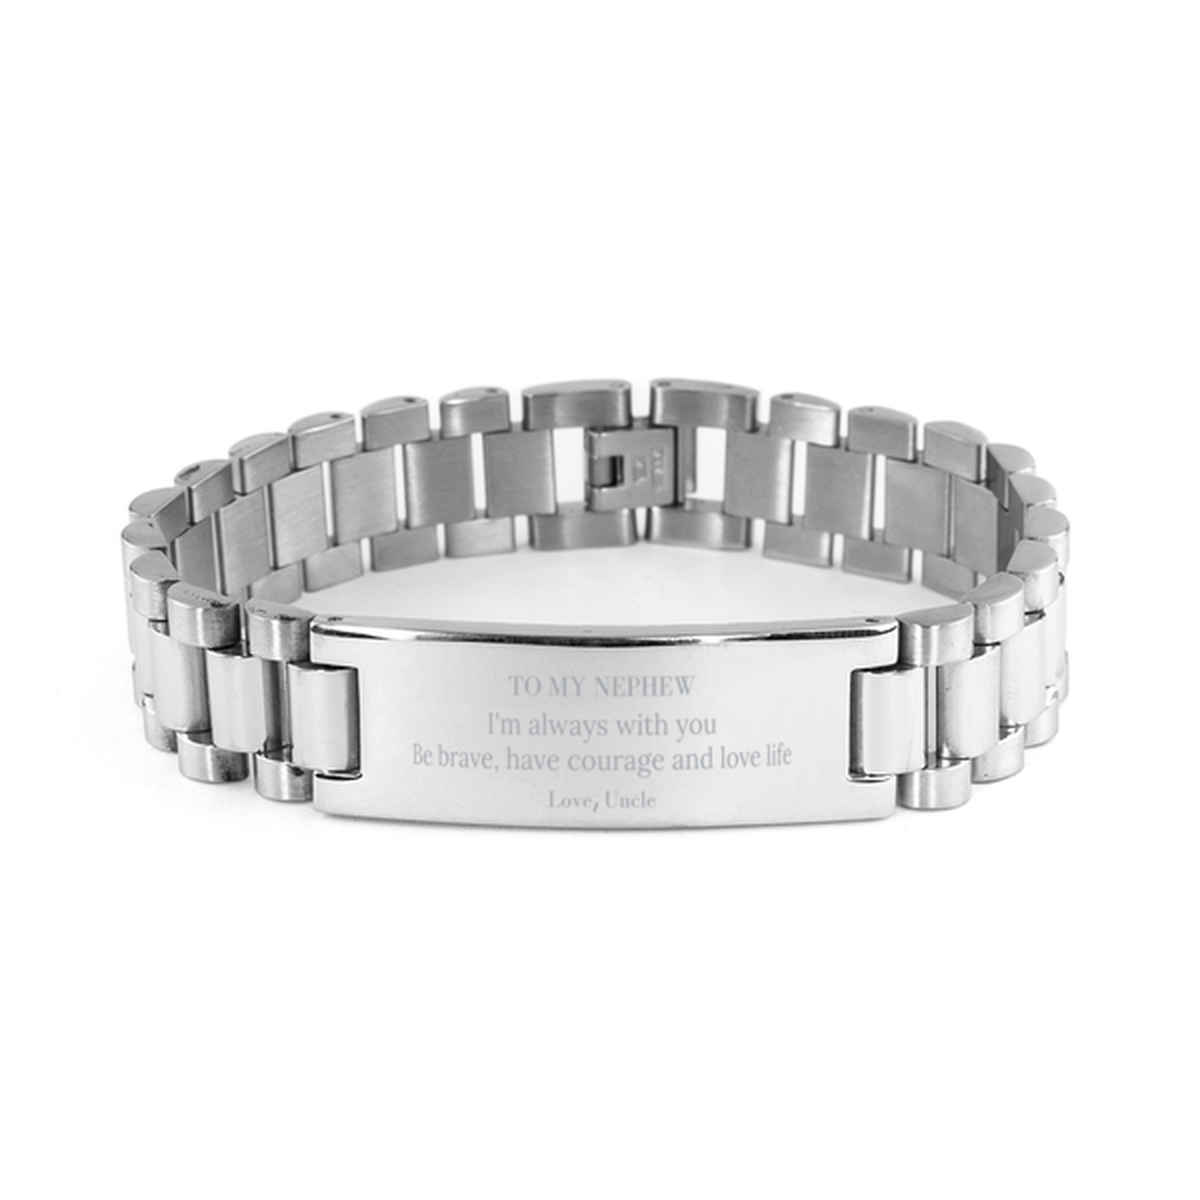 To My Nephew Gifts from Uncle, Unique Ladder Stainless Steel Bracelet Inspirational Christmas Birthday Graduation Gifts for Nephew I'm always with you. Be brave, have courage and love life. Love, Uncle